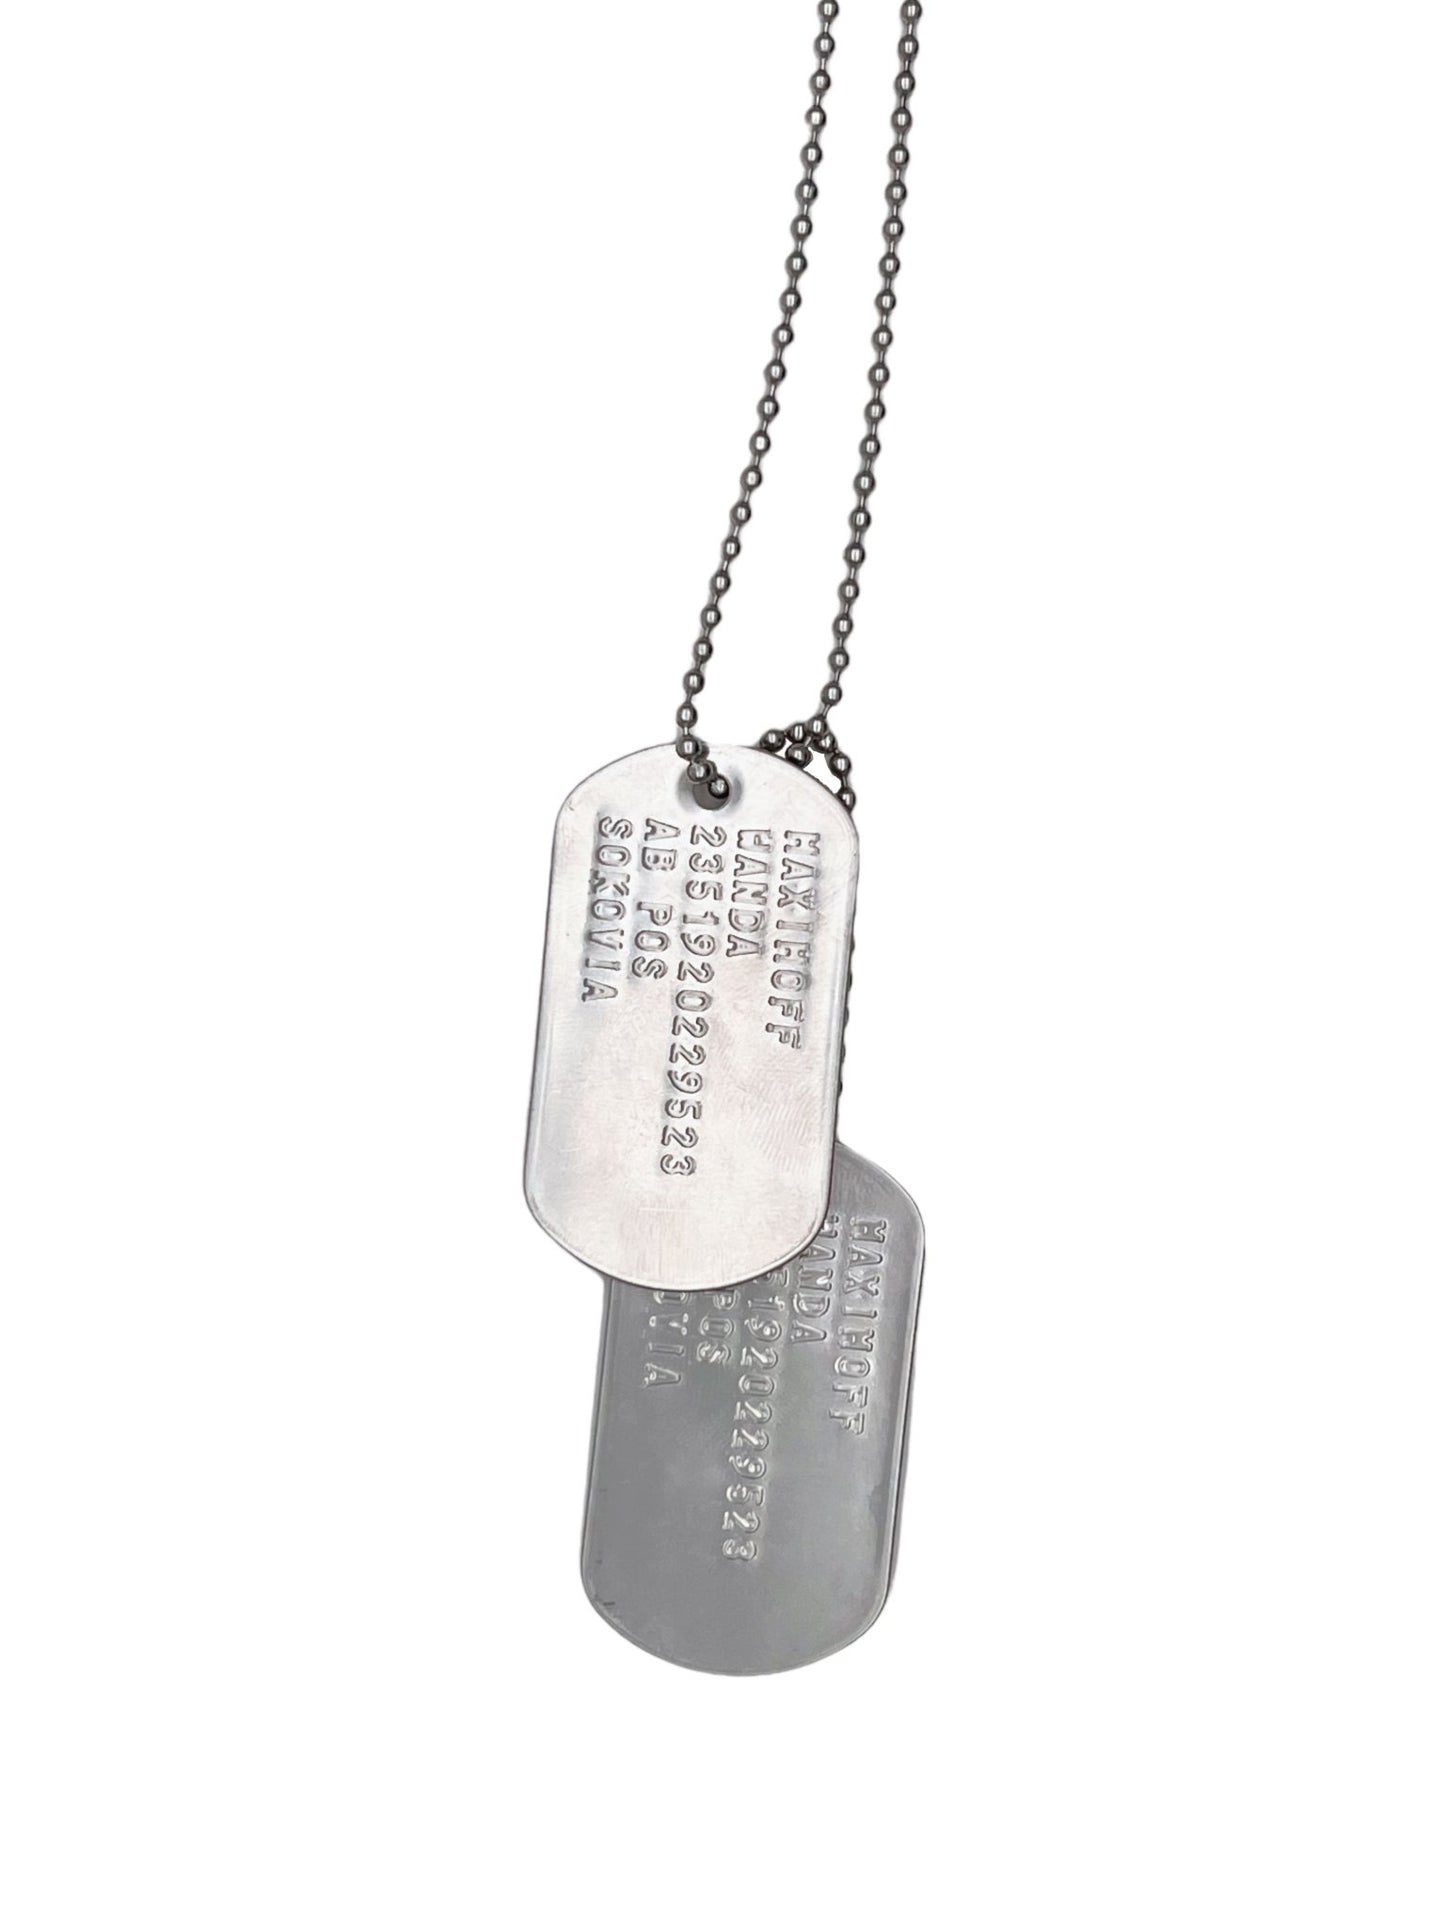 WANDA 'Scarlet Witch' MAXIMOFF Military Dog Tags - Costume Cosplay Prop Replica - Stainless Steel Chains Included - TheDogTagCo